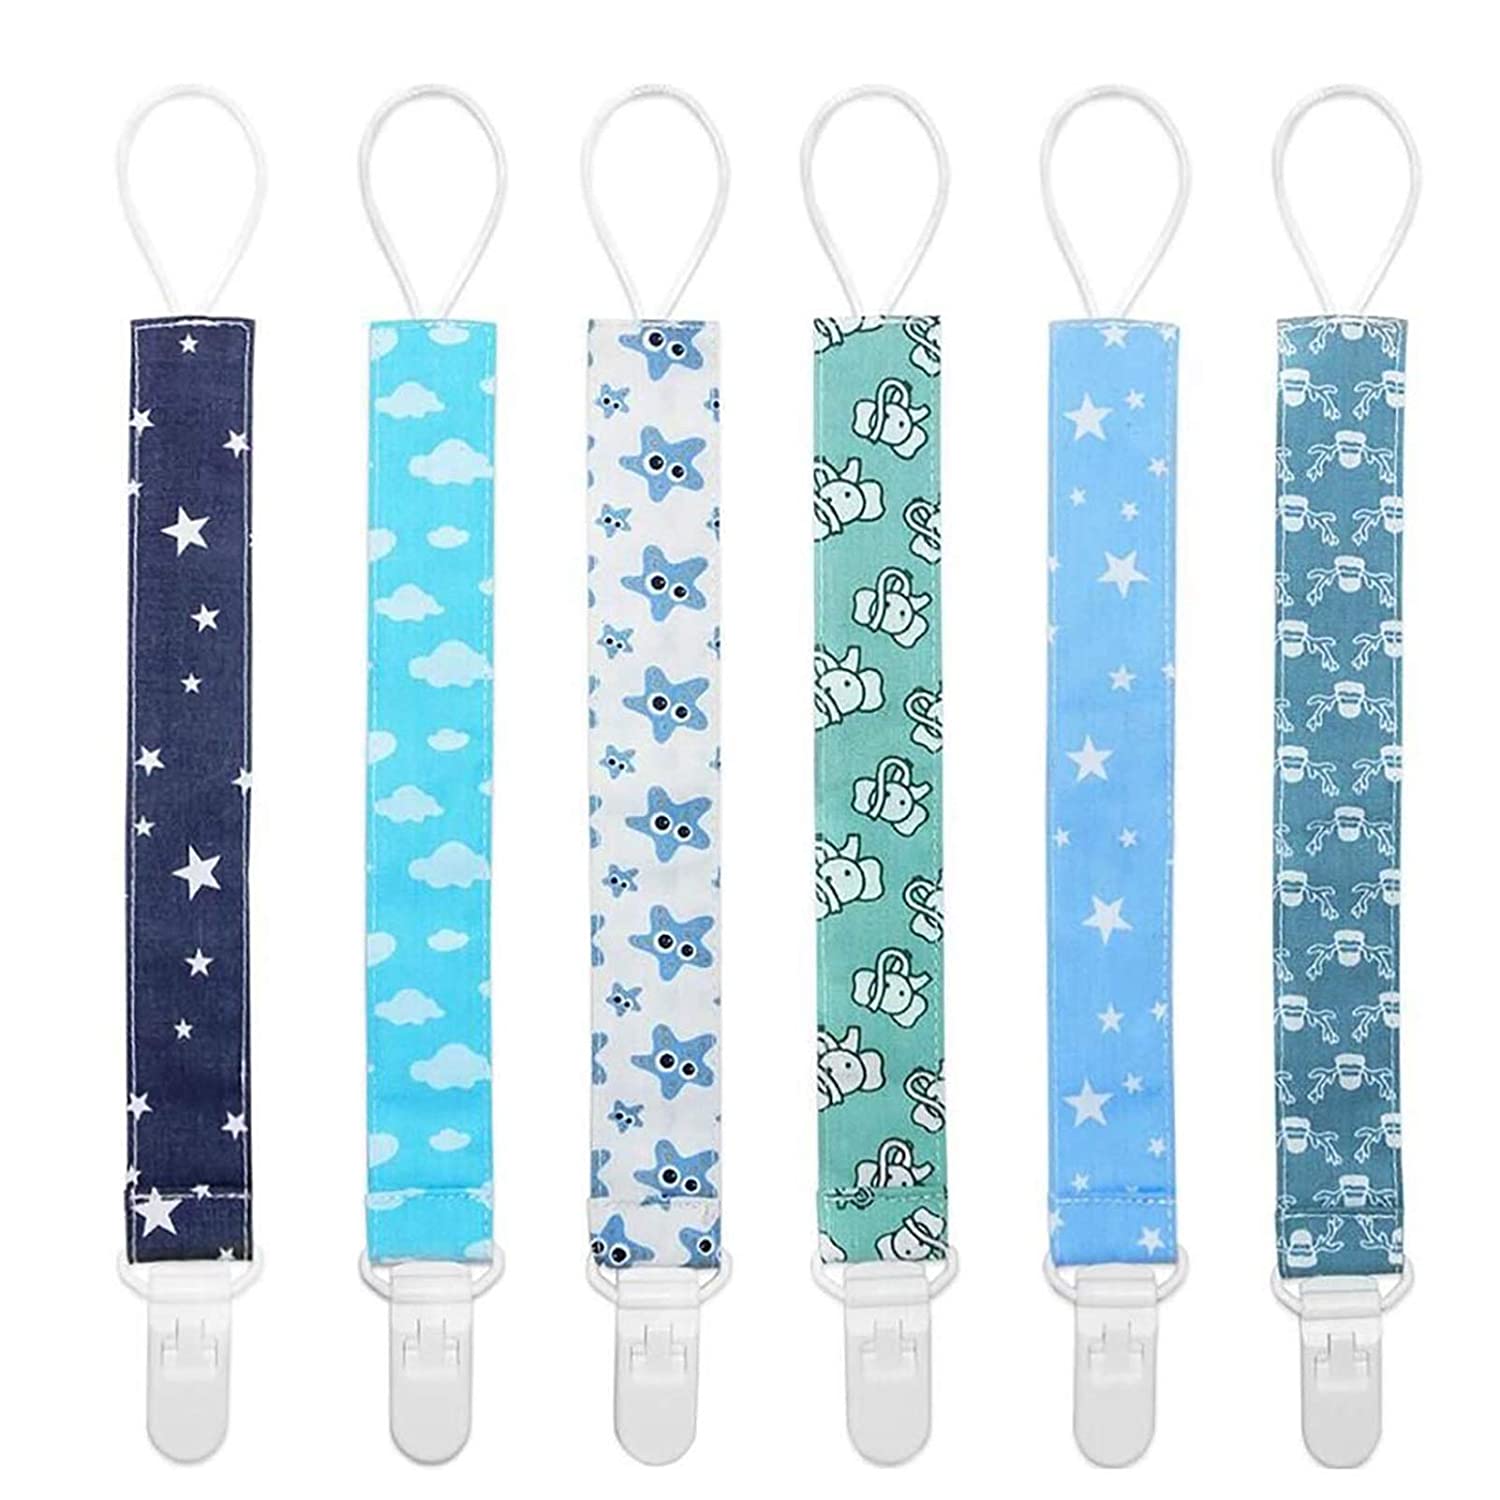 Pacifier Clip for Boys and Girls 6 Pack Plastic Teething Clips Modern Designs Universal Holder Leash for Pacifiers Teething Toy and Soothie by YOOFOSS